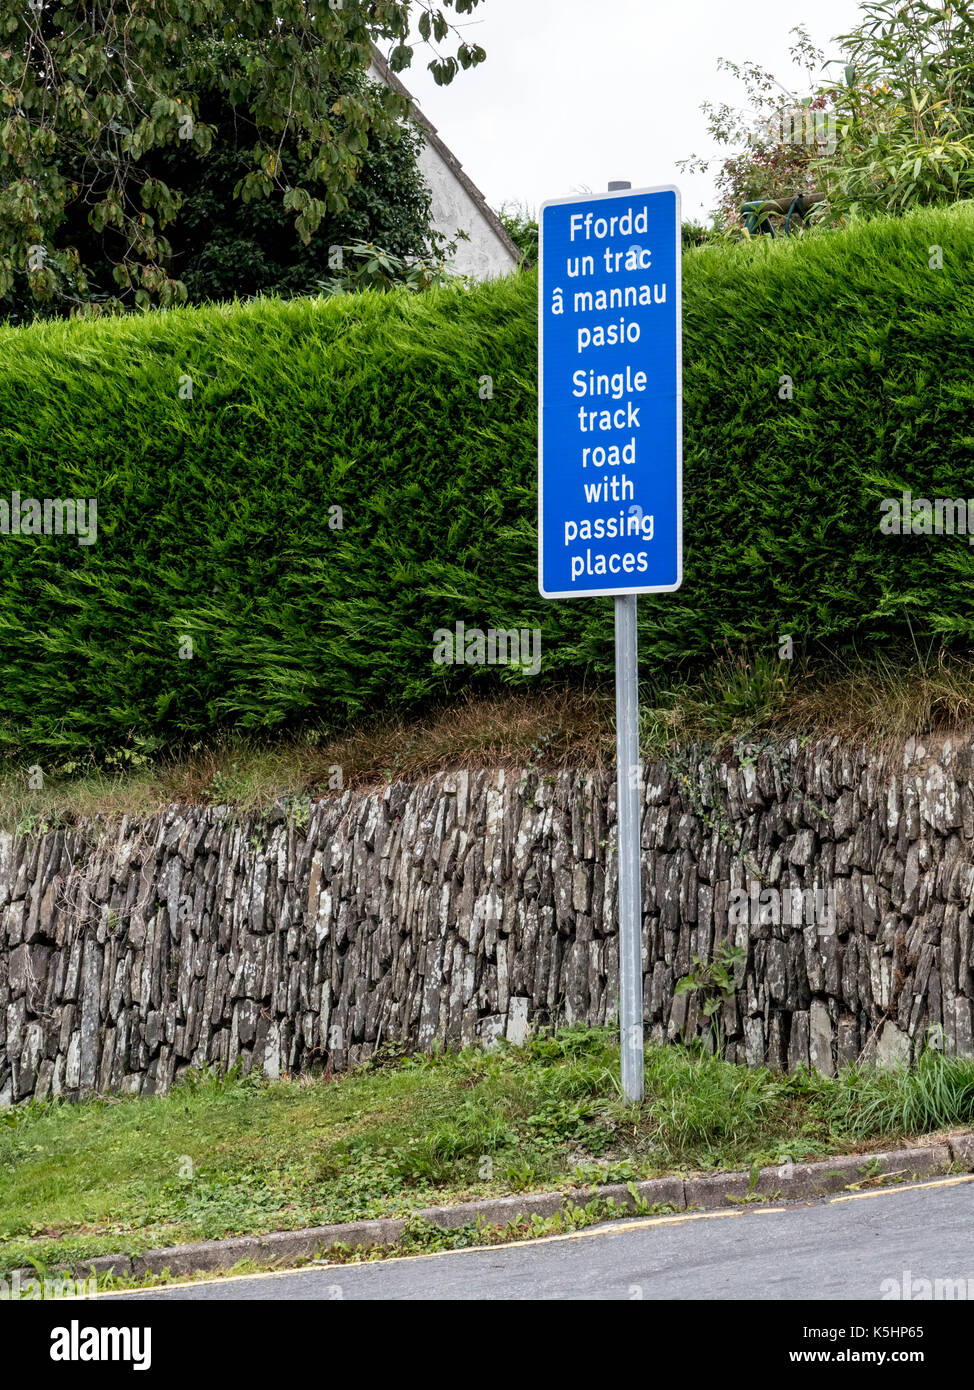 Blue and white sign in Welsh and English advising that the road ahead is a single track with passing places Stock Photo